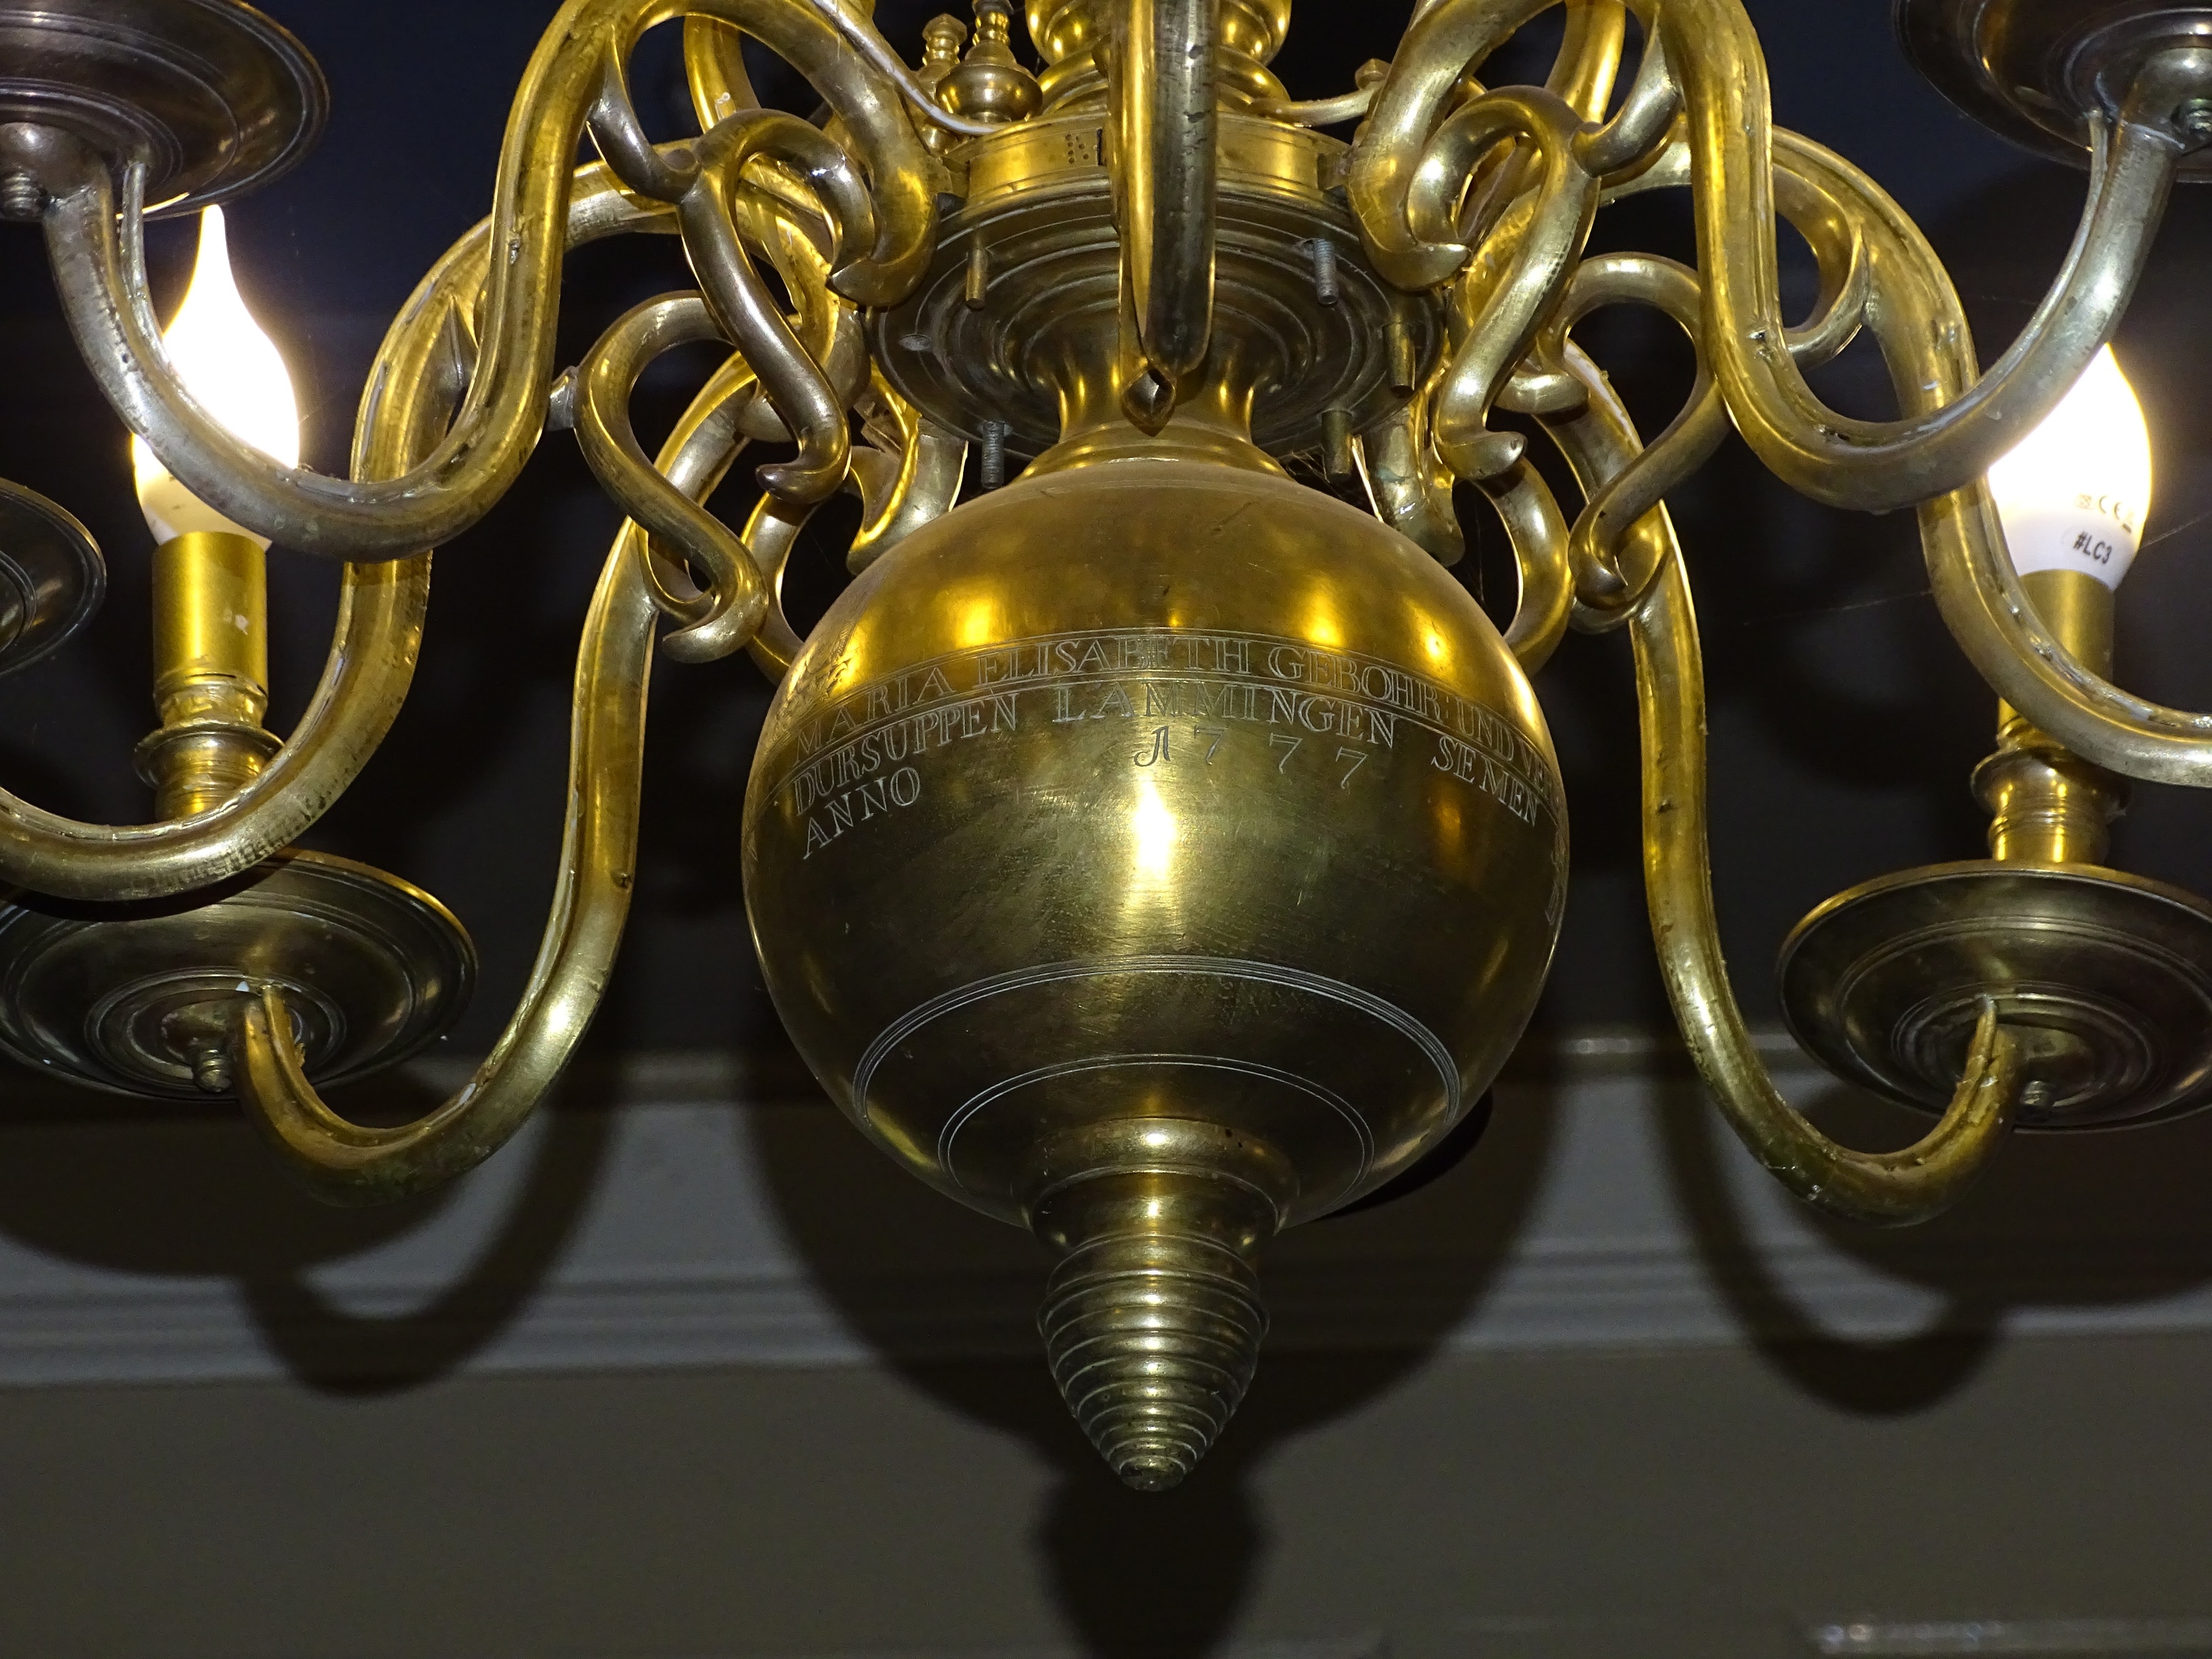 Fragment of the chandelier, 1777, Tukums Holy Trinity Evangelical Lutheran Church. Photo by Alantė Valtaitė-Gagač, 2021